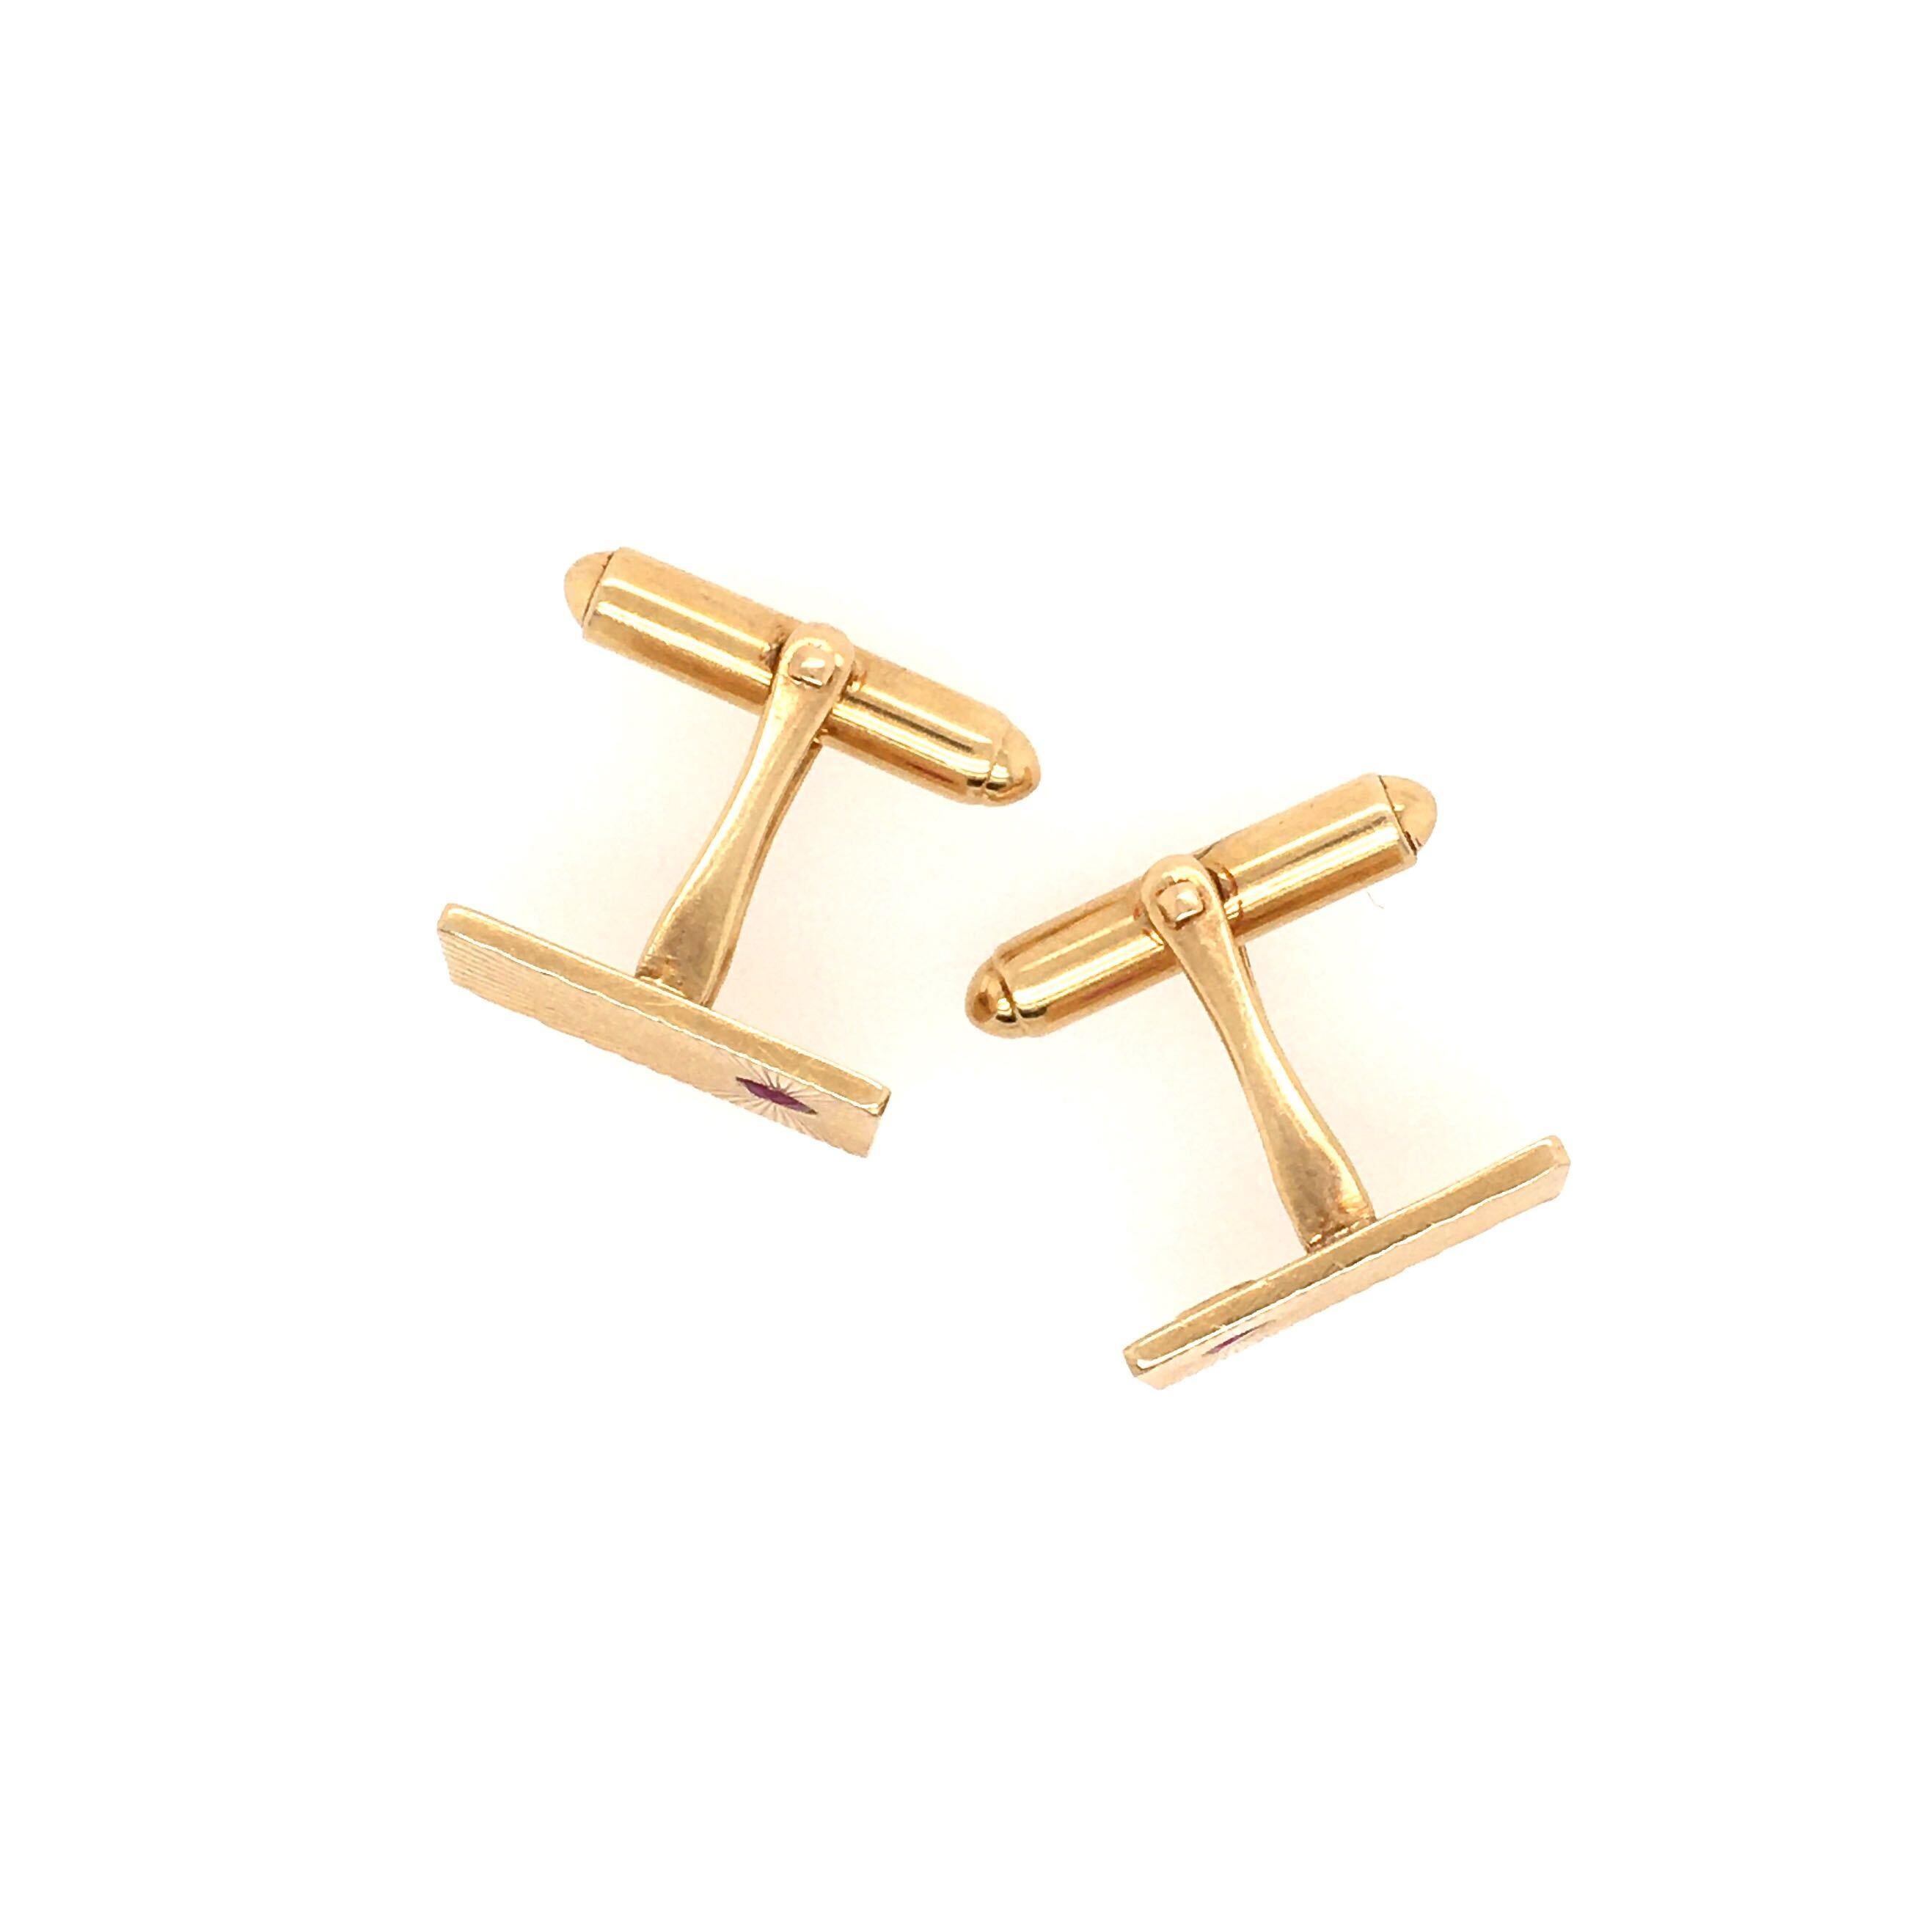 A pair of 14 karat yellow gold and ruby cufflinks with spring links, circa 1940s, Tiffany.  The face of each rectangular cufflink is set with a 3mm round faceted ruby toward one end, with a sunray pattern radiating from around the ruby.  Each